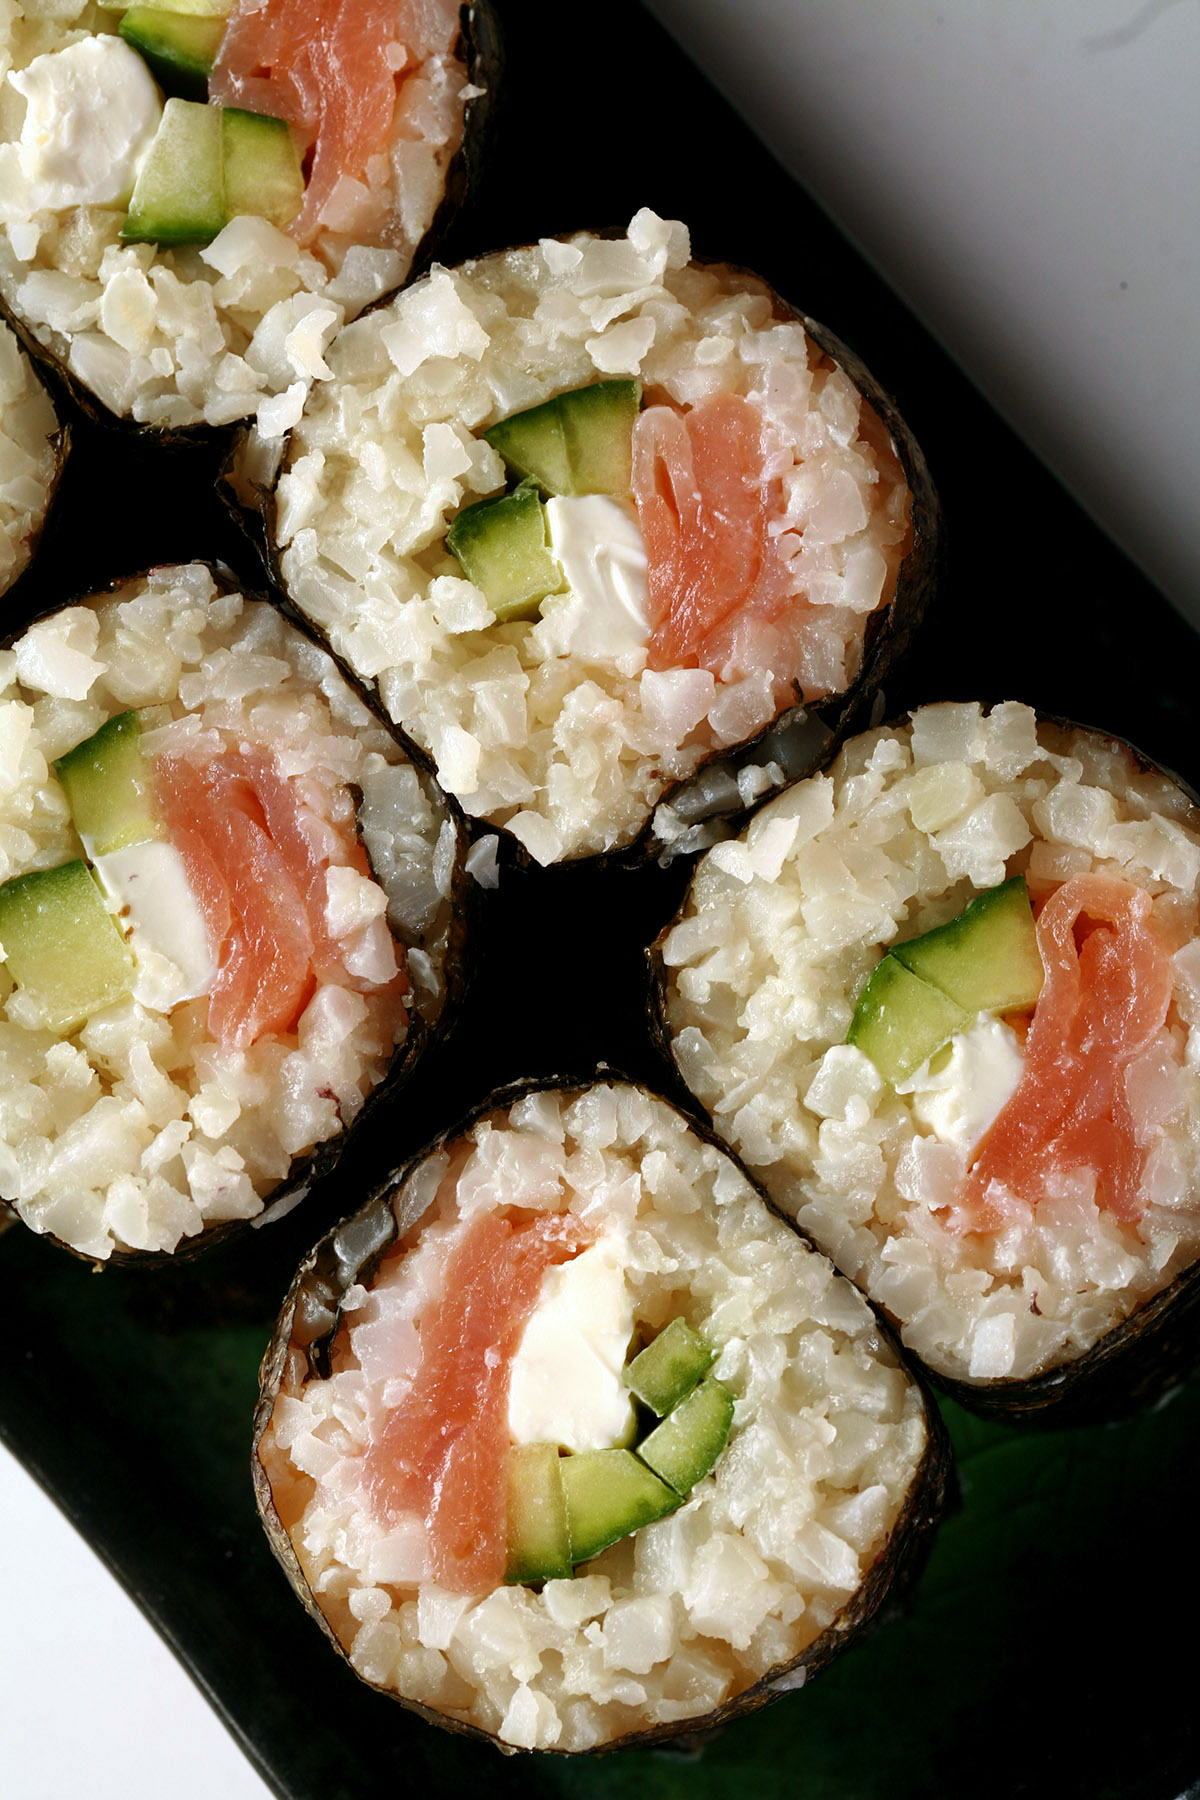 A close up view of a philly roll made from keto sushi rice.